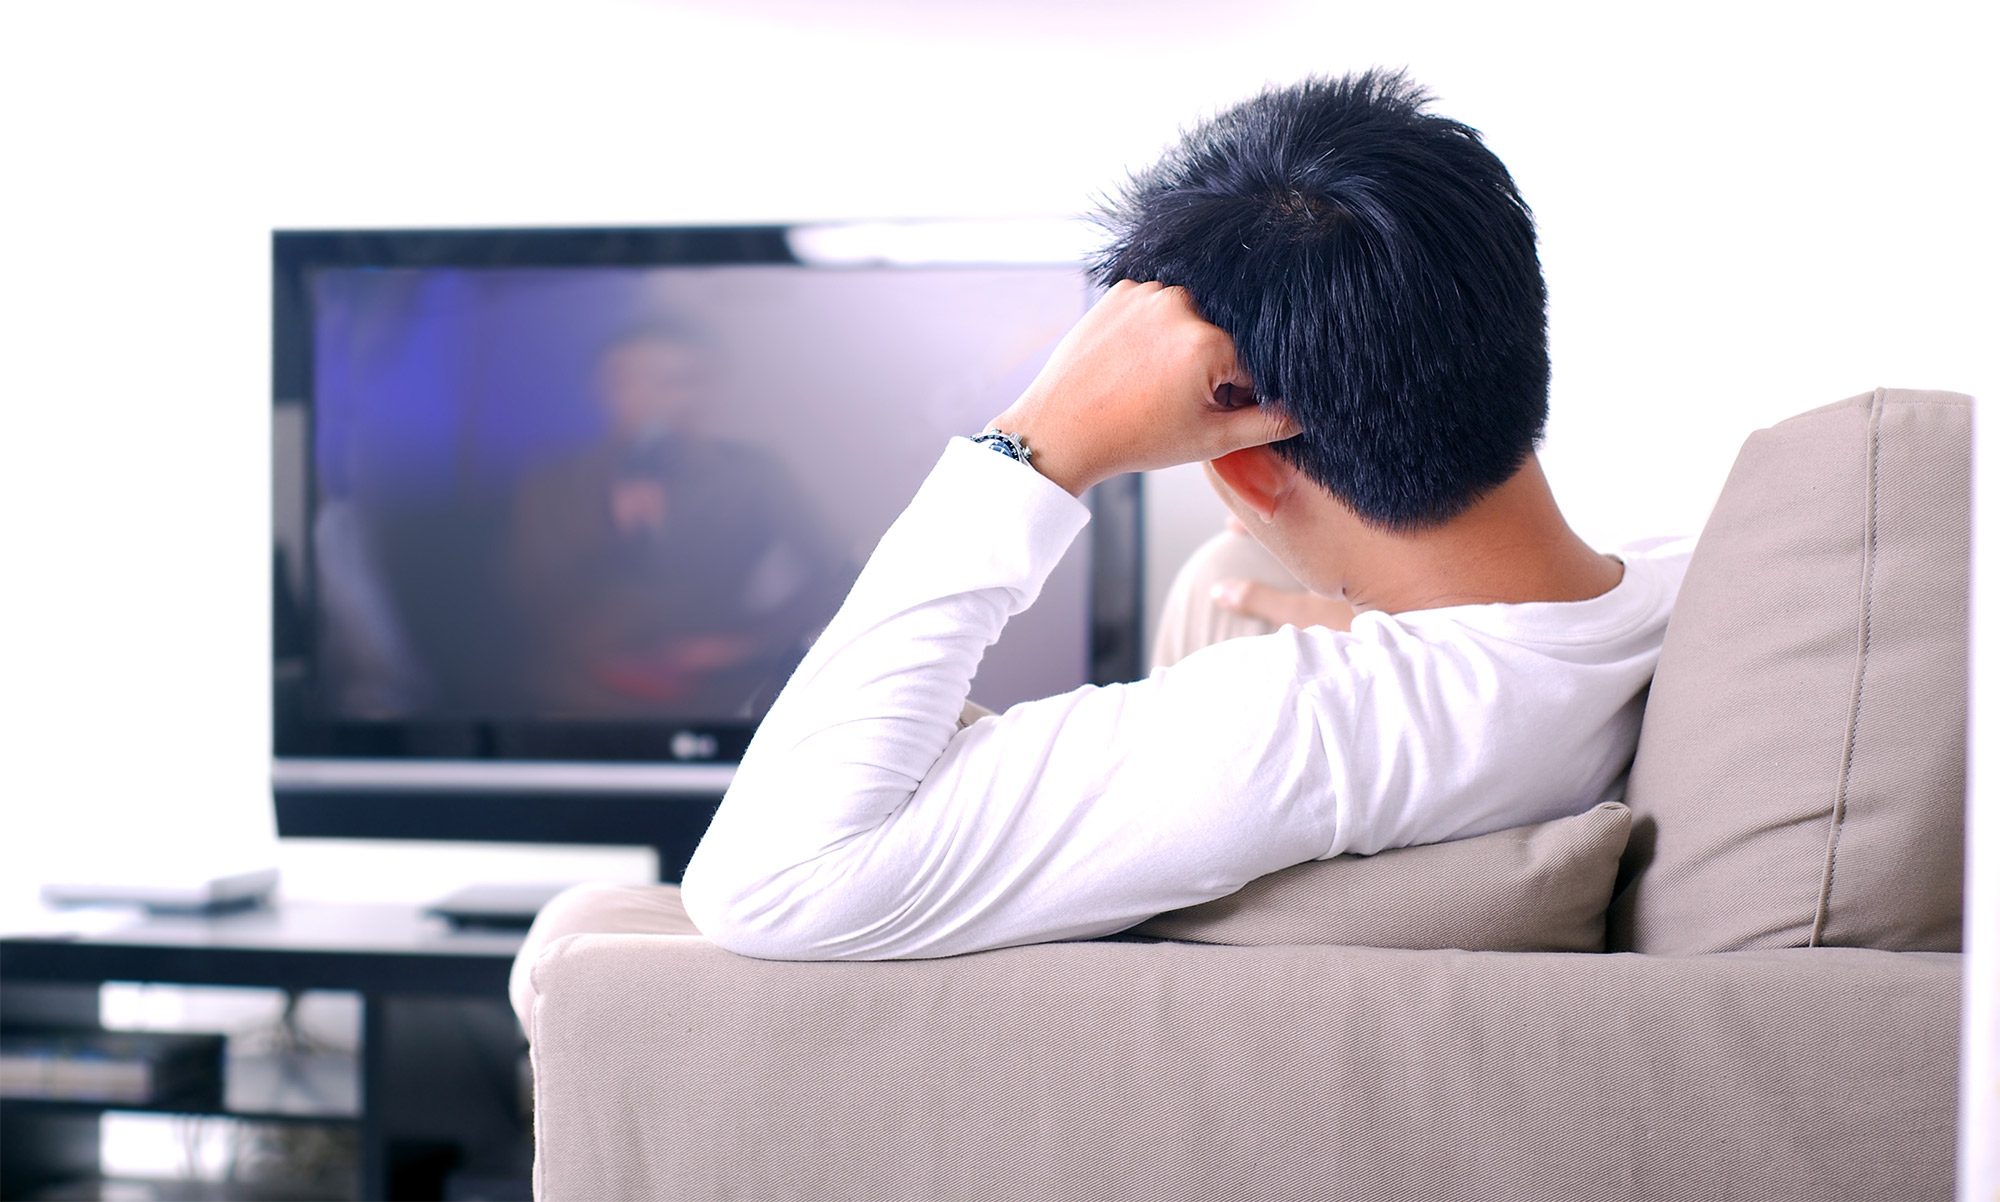 UK adults spend 12 hours a week watching on-demand TV but only 90 minutes exercising